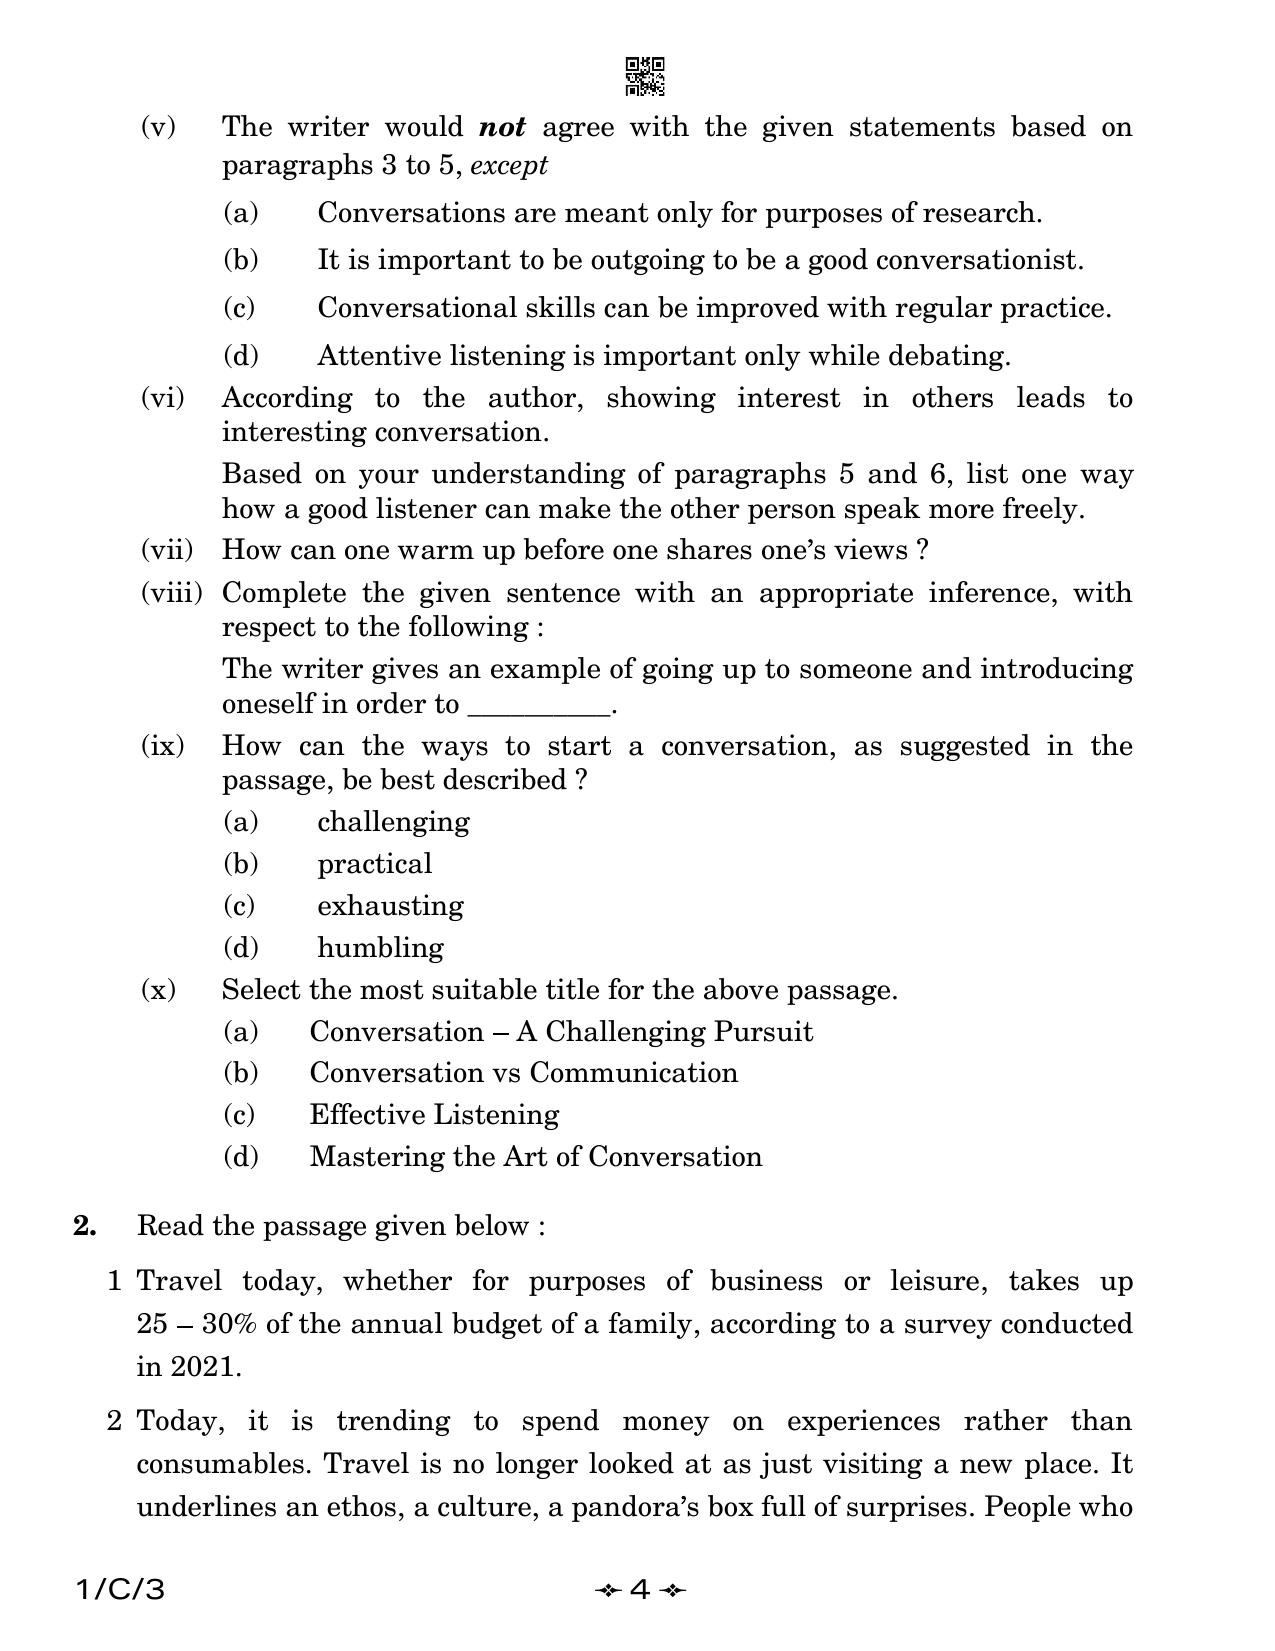 CBSE Class 12 1-3 English Core 2023 (Compartment) Question Paper - Page 4